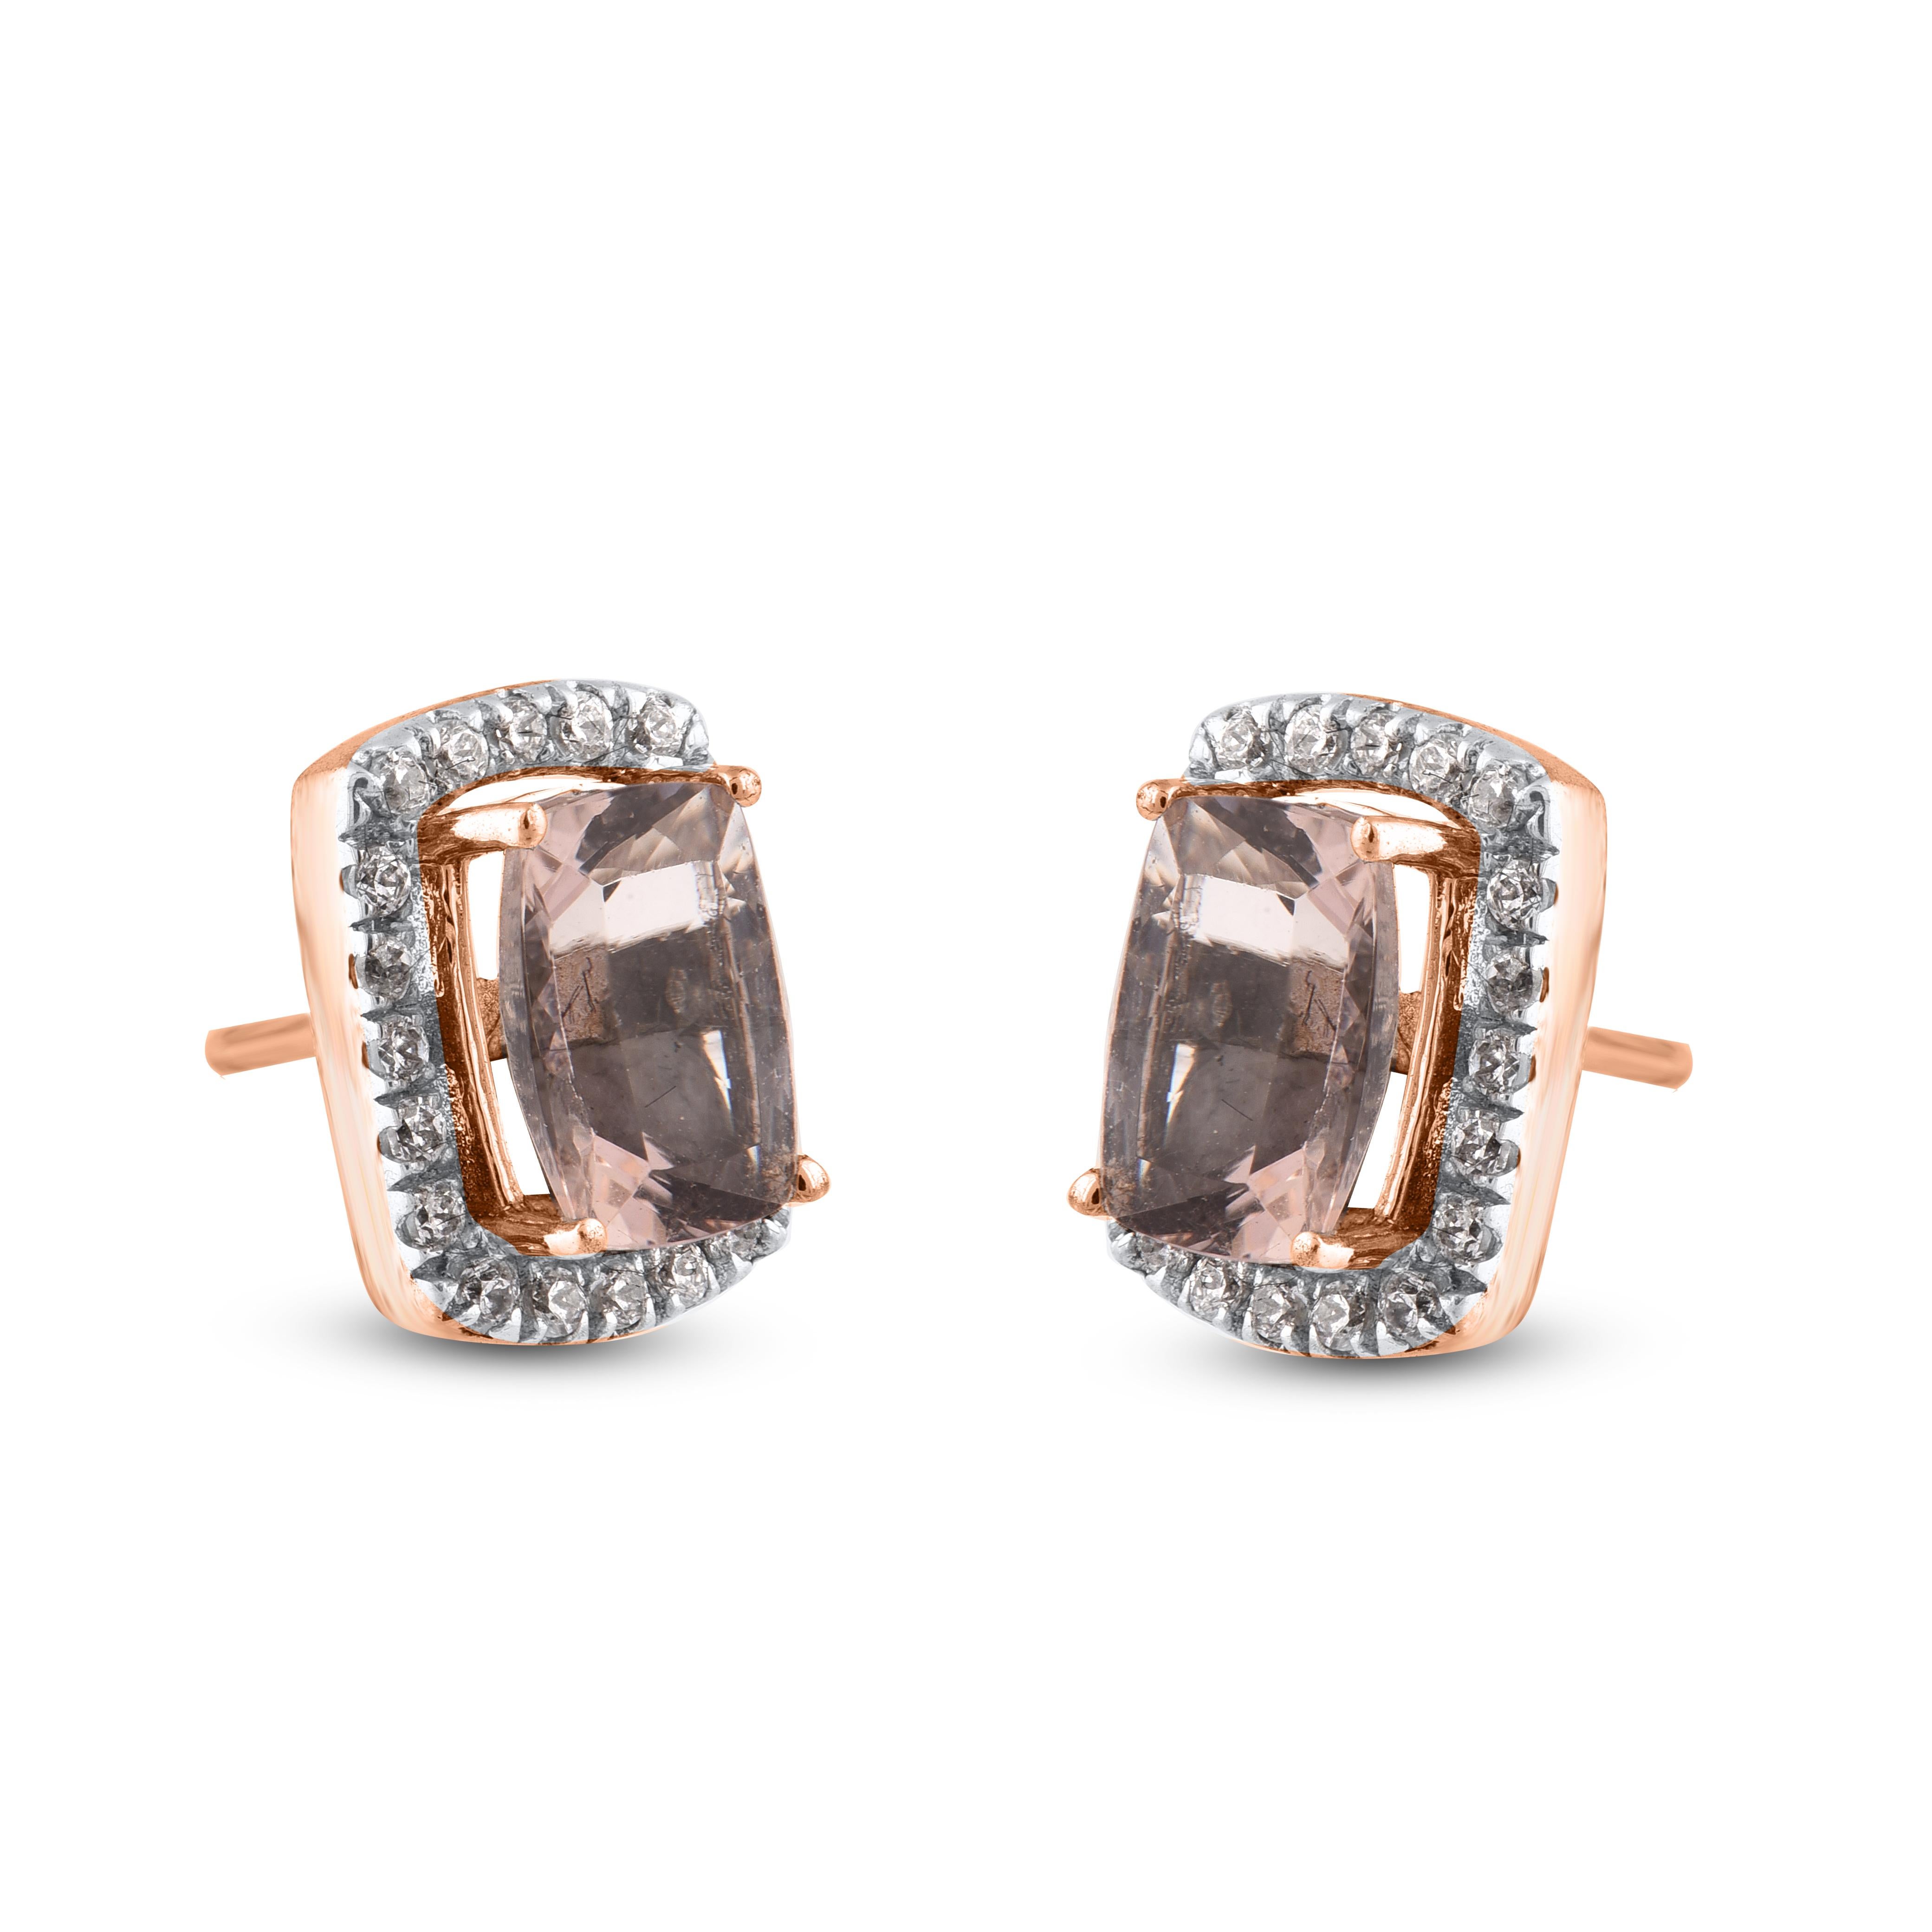 Contemporary TJD 2.75 Carat Cushion Cut Morganite & Diamond 14KT Rose Gold Halo Stud Earrings For Sale